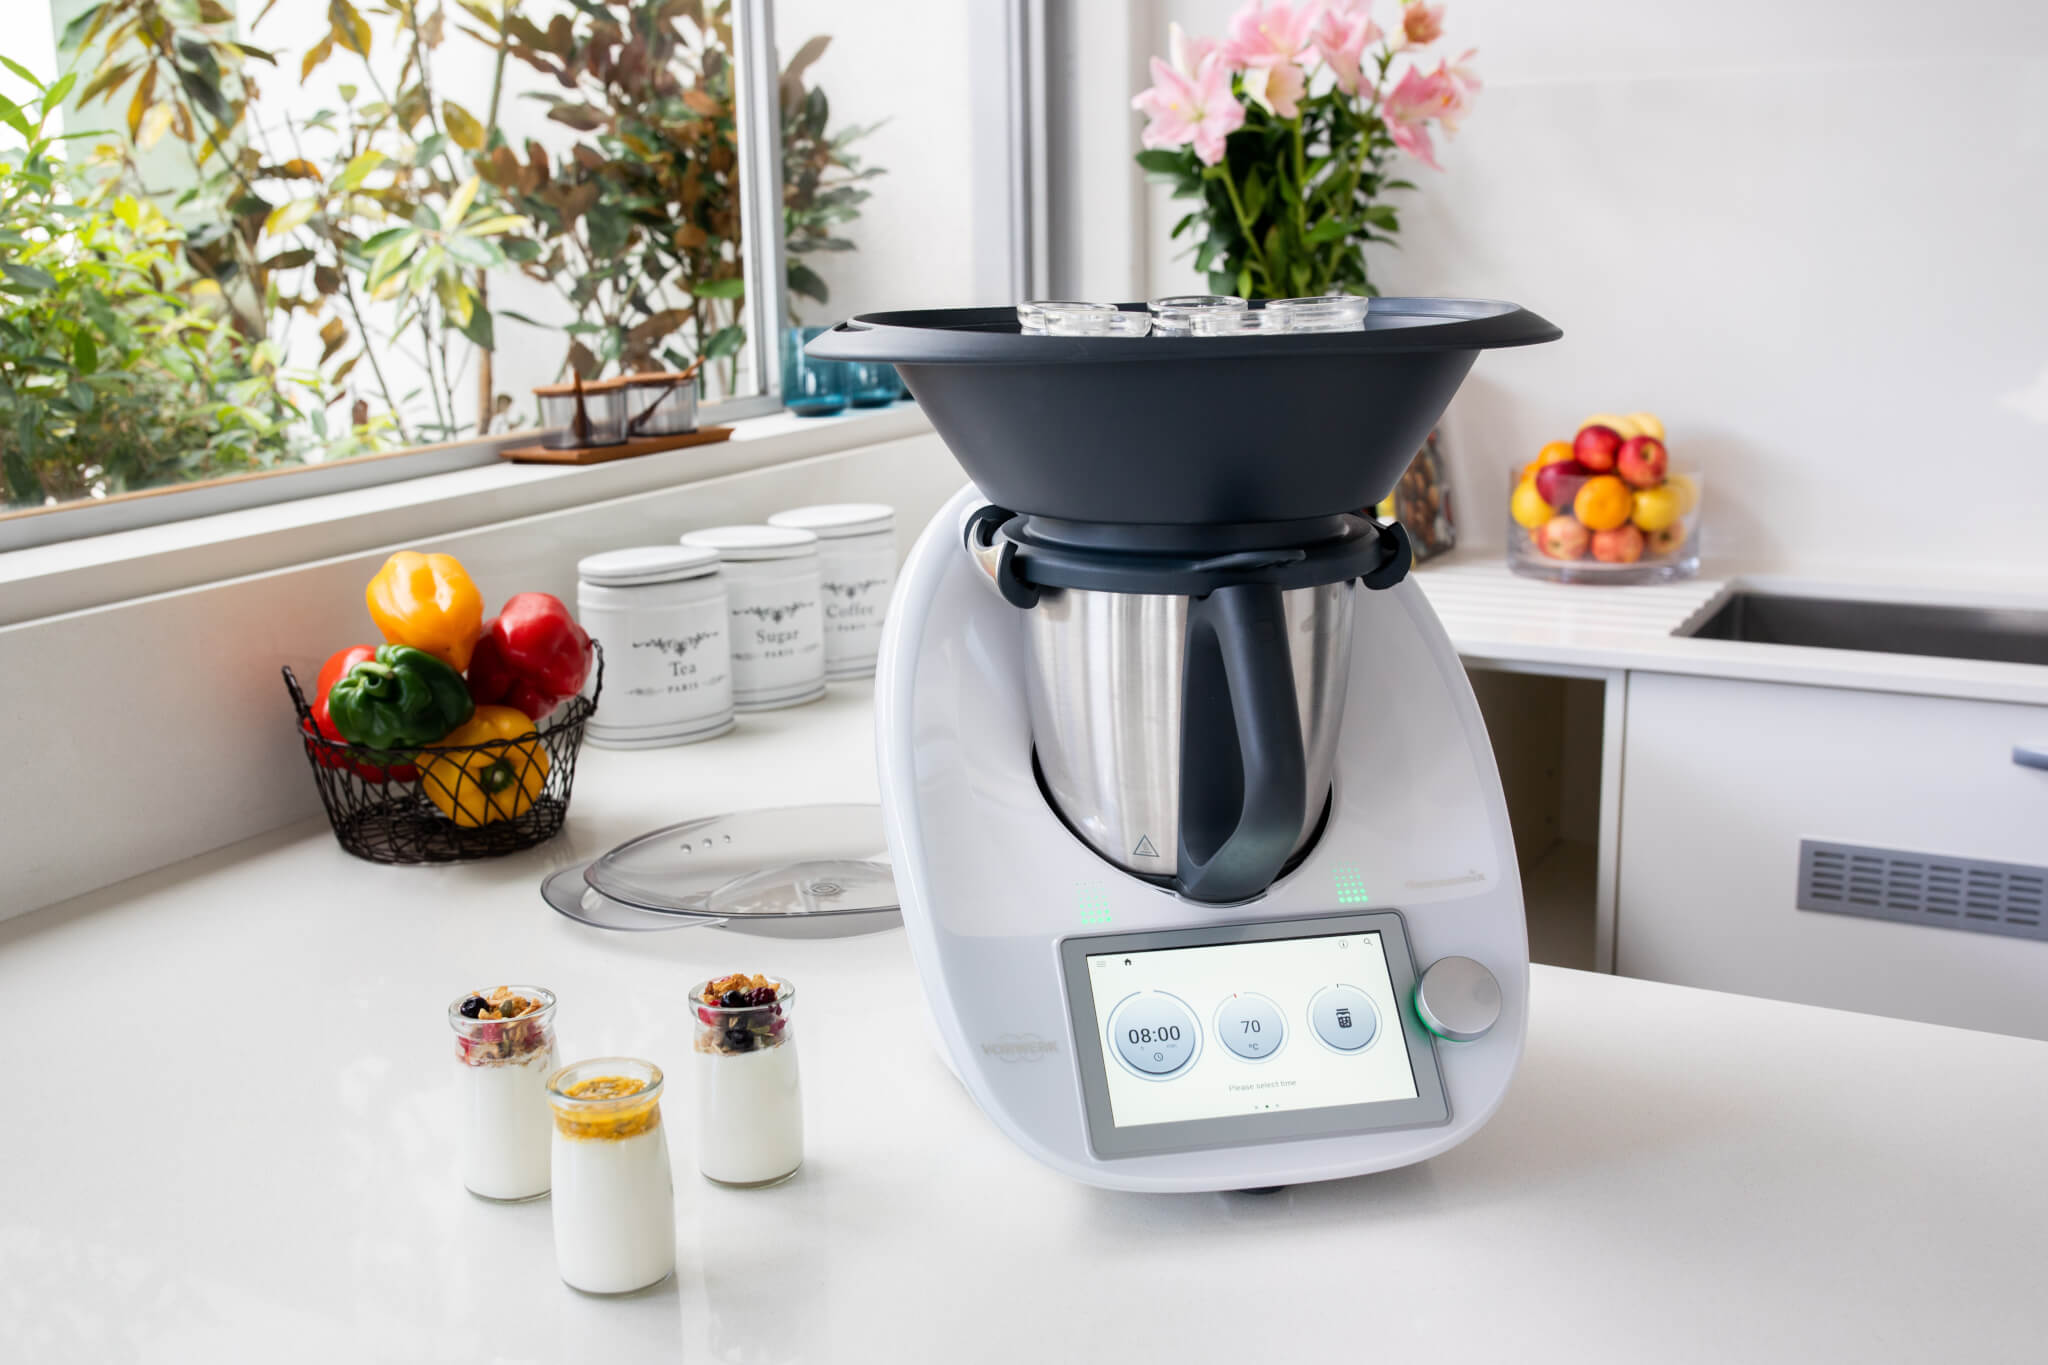 Thermomix TM31 Trade In for TM5: Extraordinary Opportunity